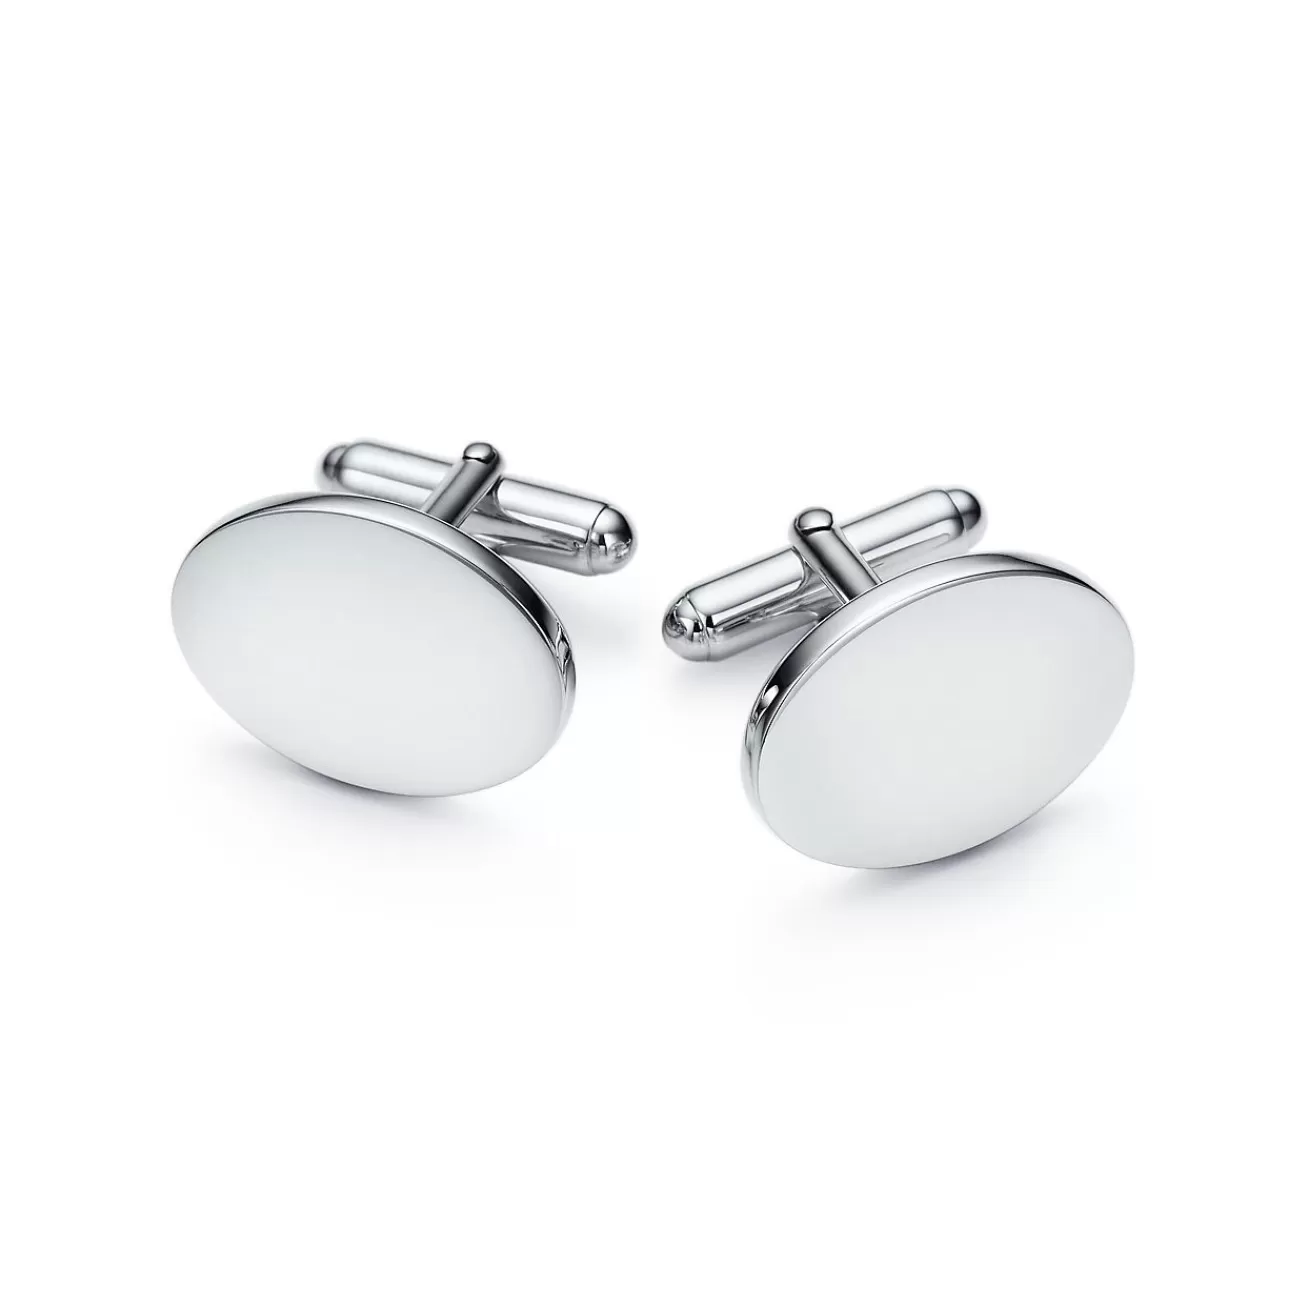 Tiffany & Co. Classic Oval Cuff Links | ^ Gifts to Personalize | Accessories